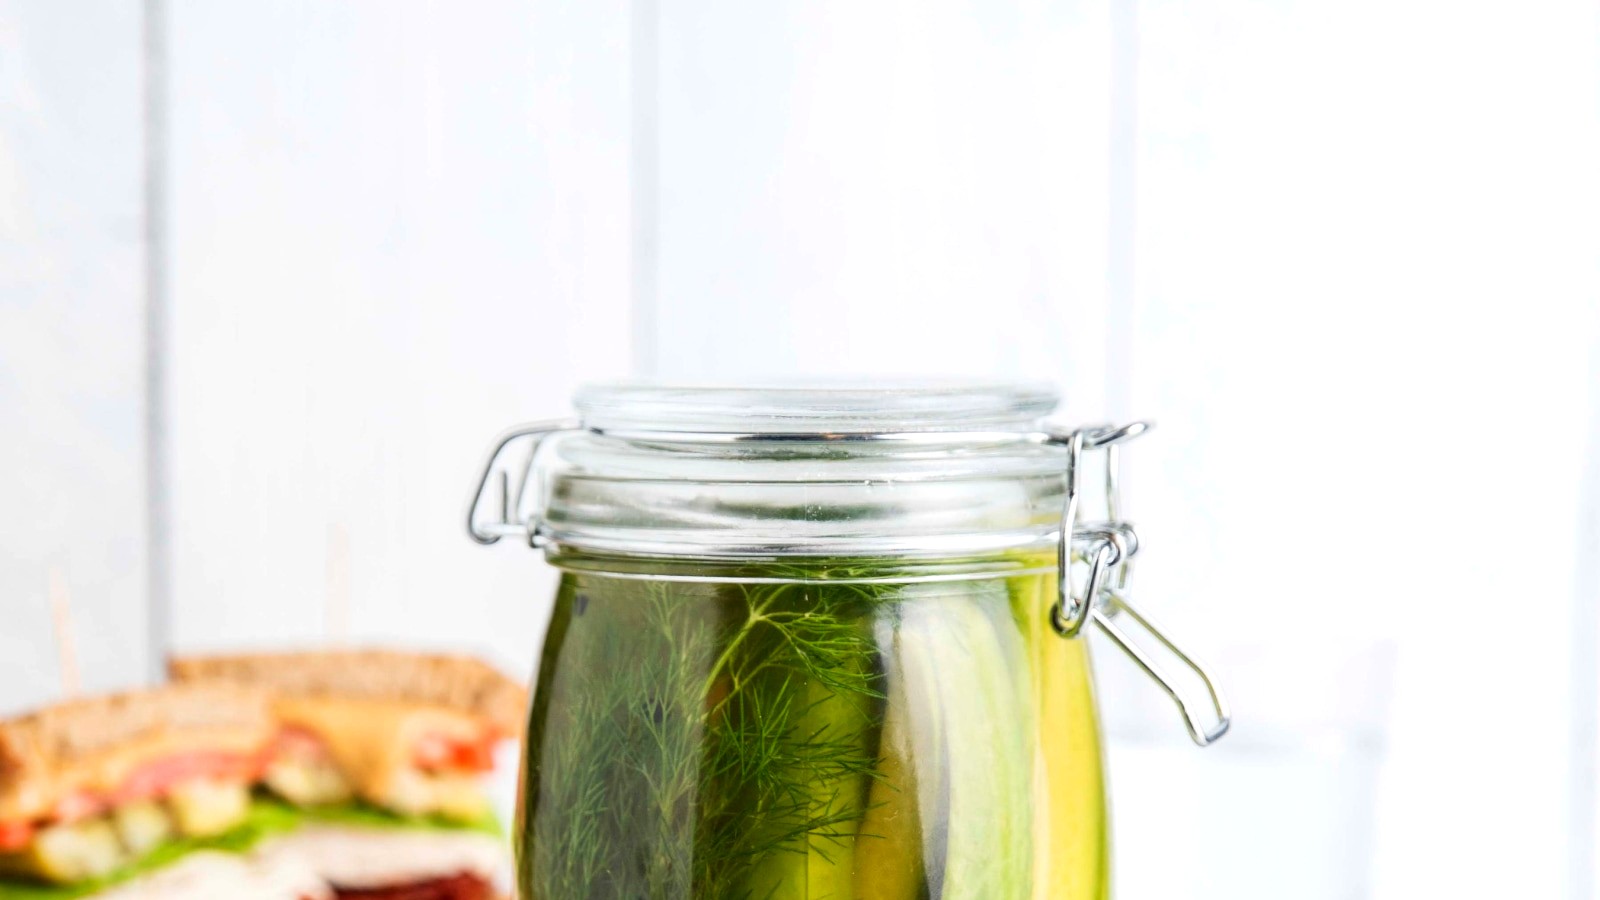 Image of Homemade Pickles